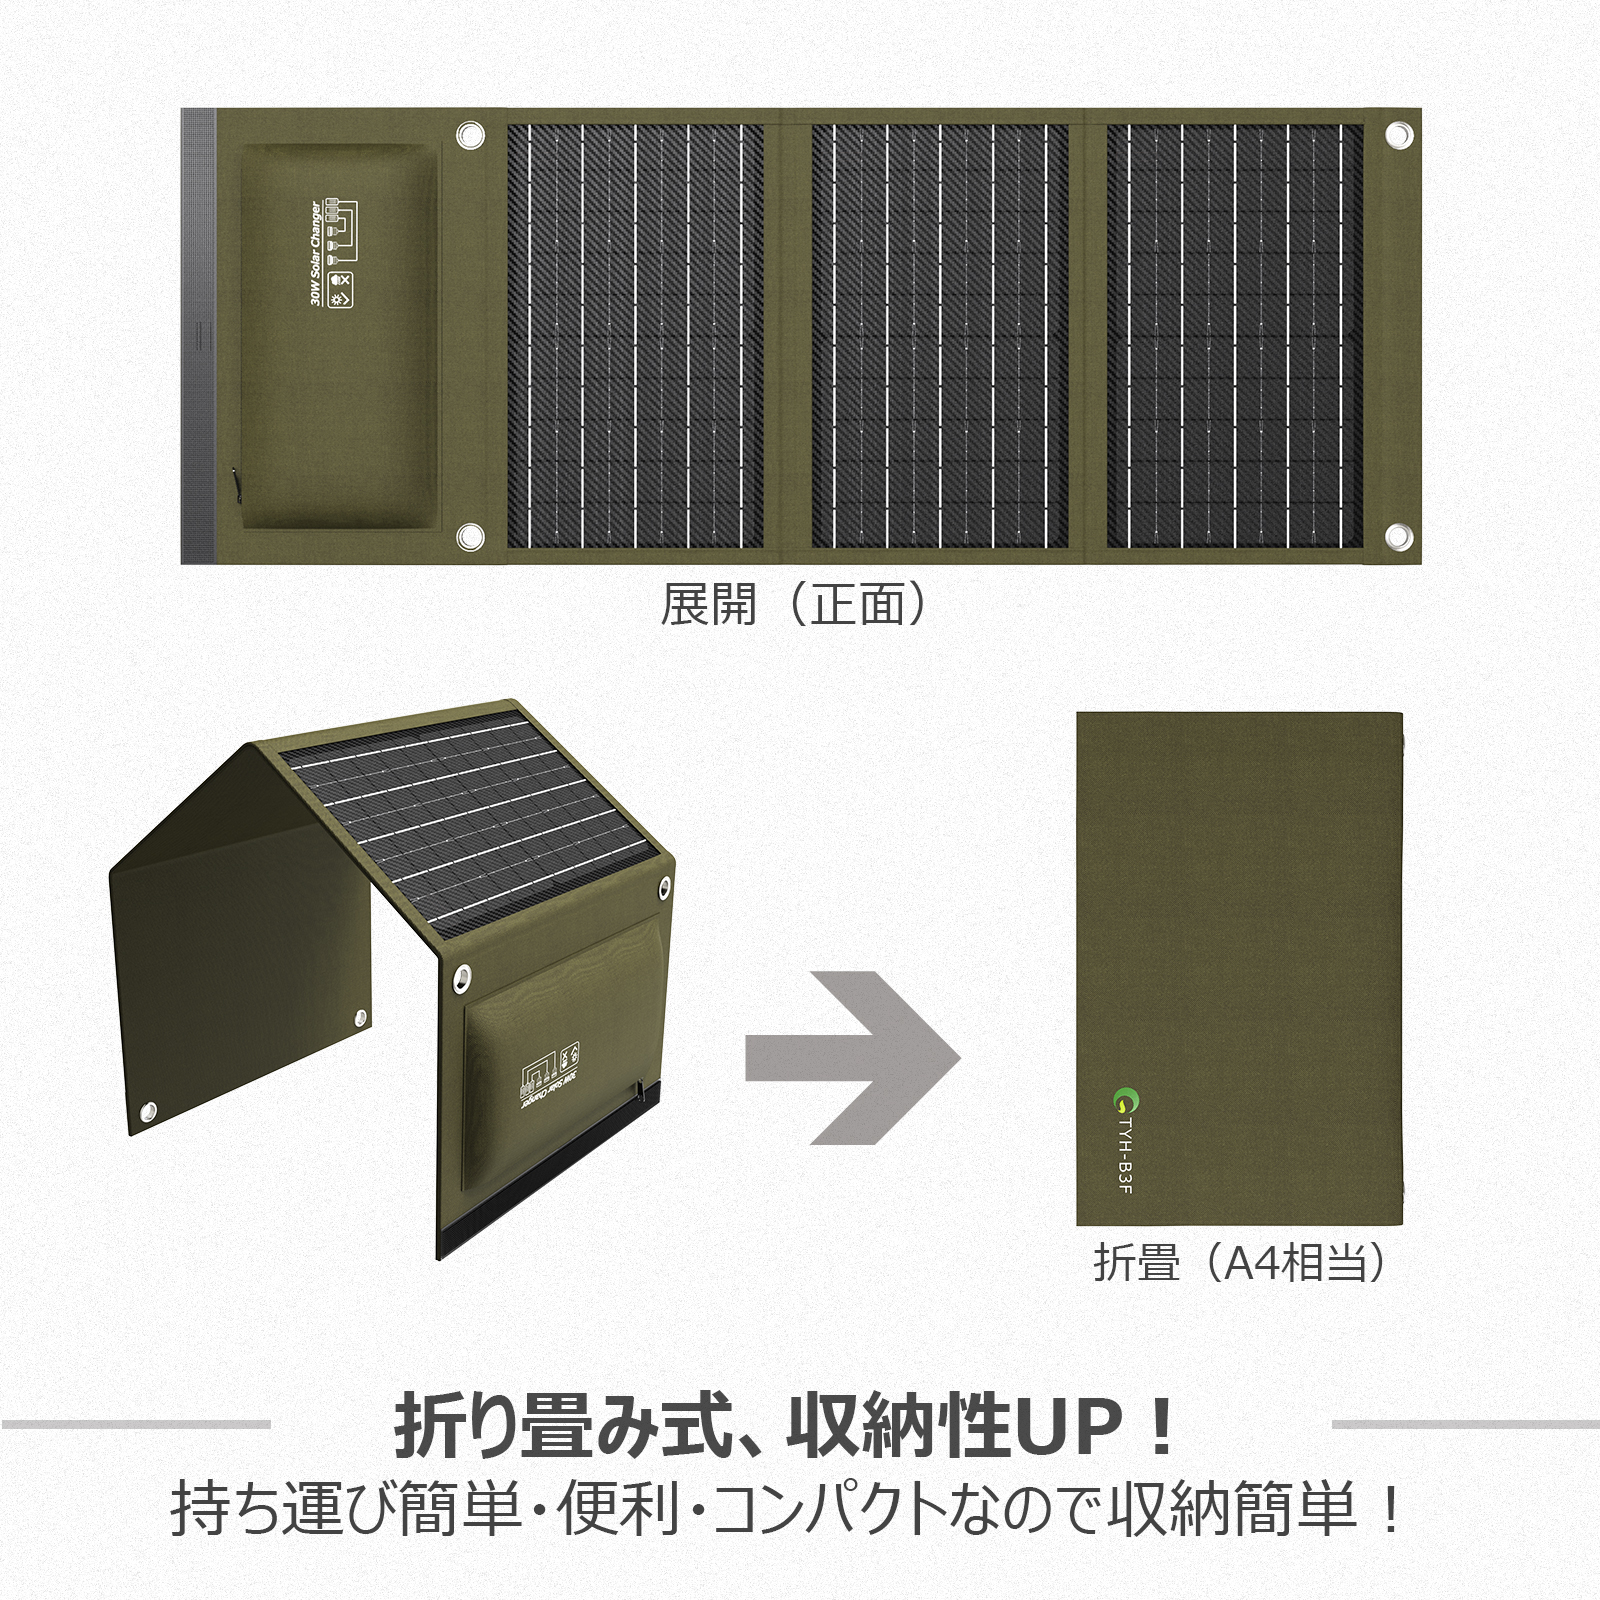  sale disaster prevention respondent .30W solar panel charger portable small size solar charger single crystal USB QC3.0 storage convenience light weight compact . electro- measures outdoors one year guarantee TYH-B3F